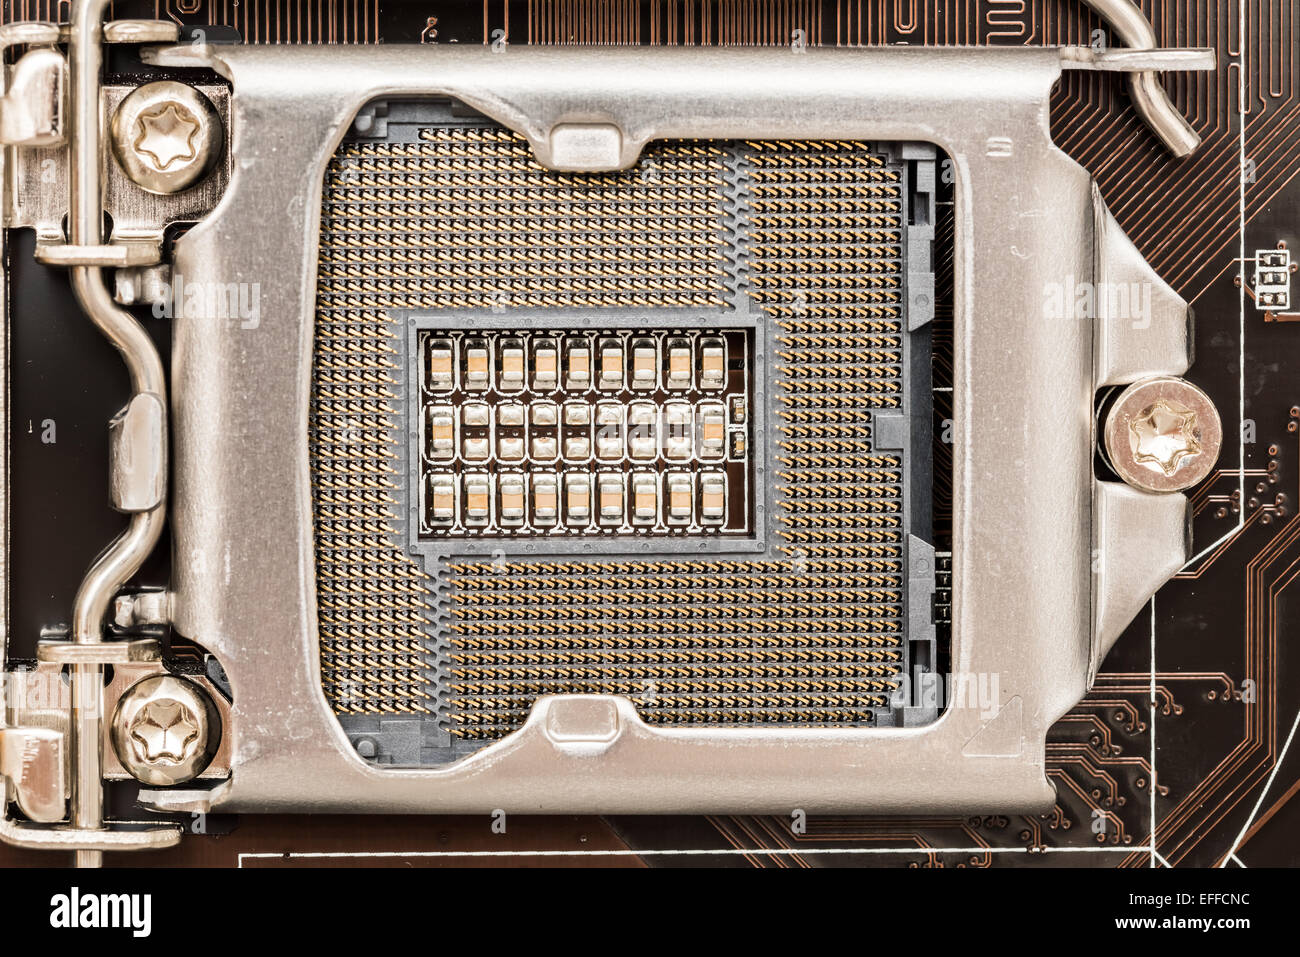 Empty CPU Socket On Computer Motherboard Stock Photo - Alamy